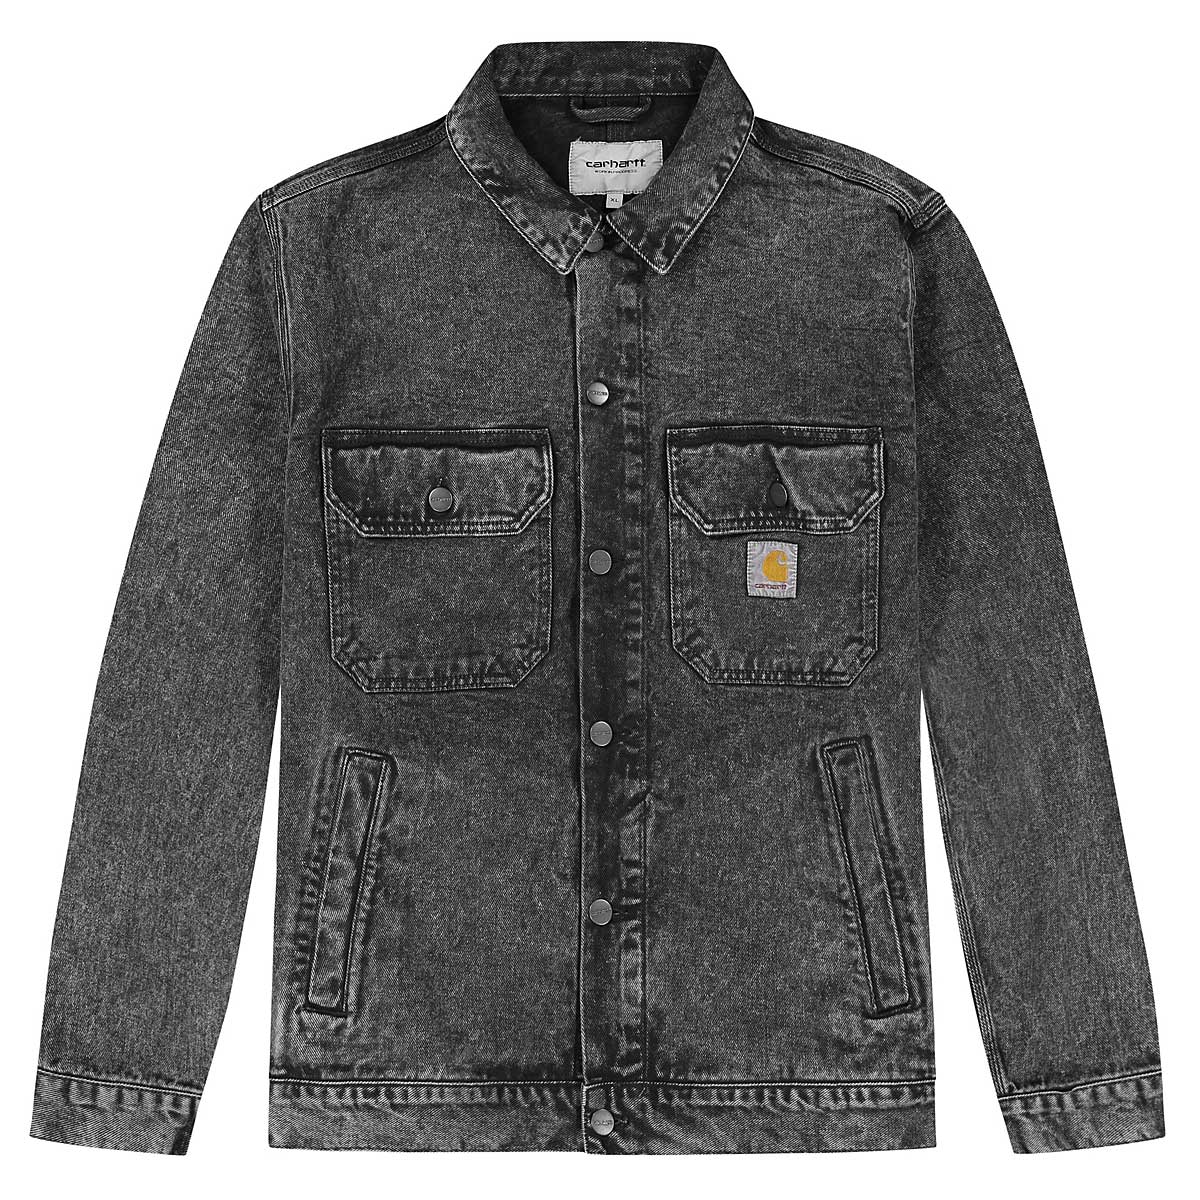 Buy Stetson Jacket for N/A 0.0 | Kickz-DE-AT-INT